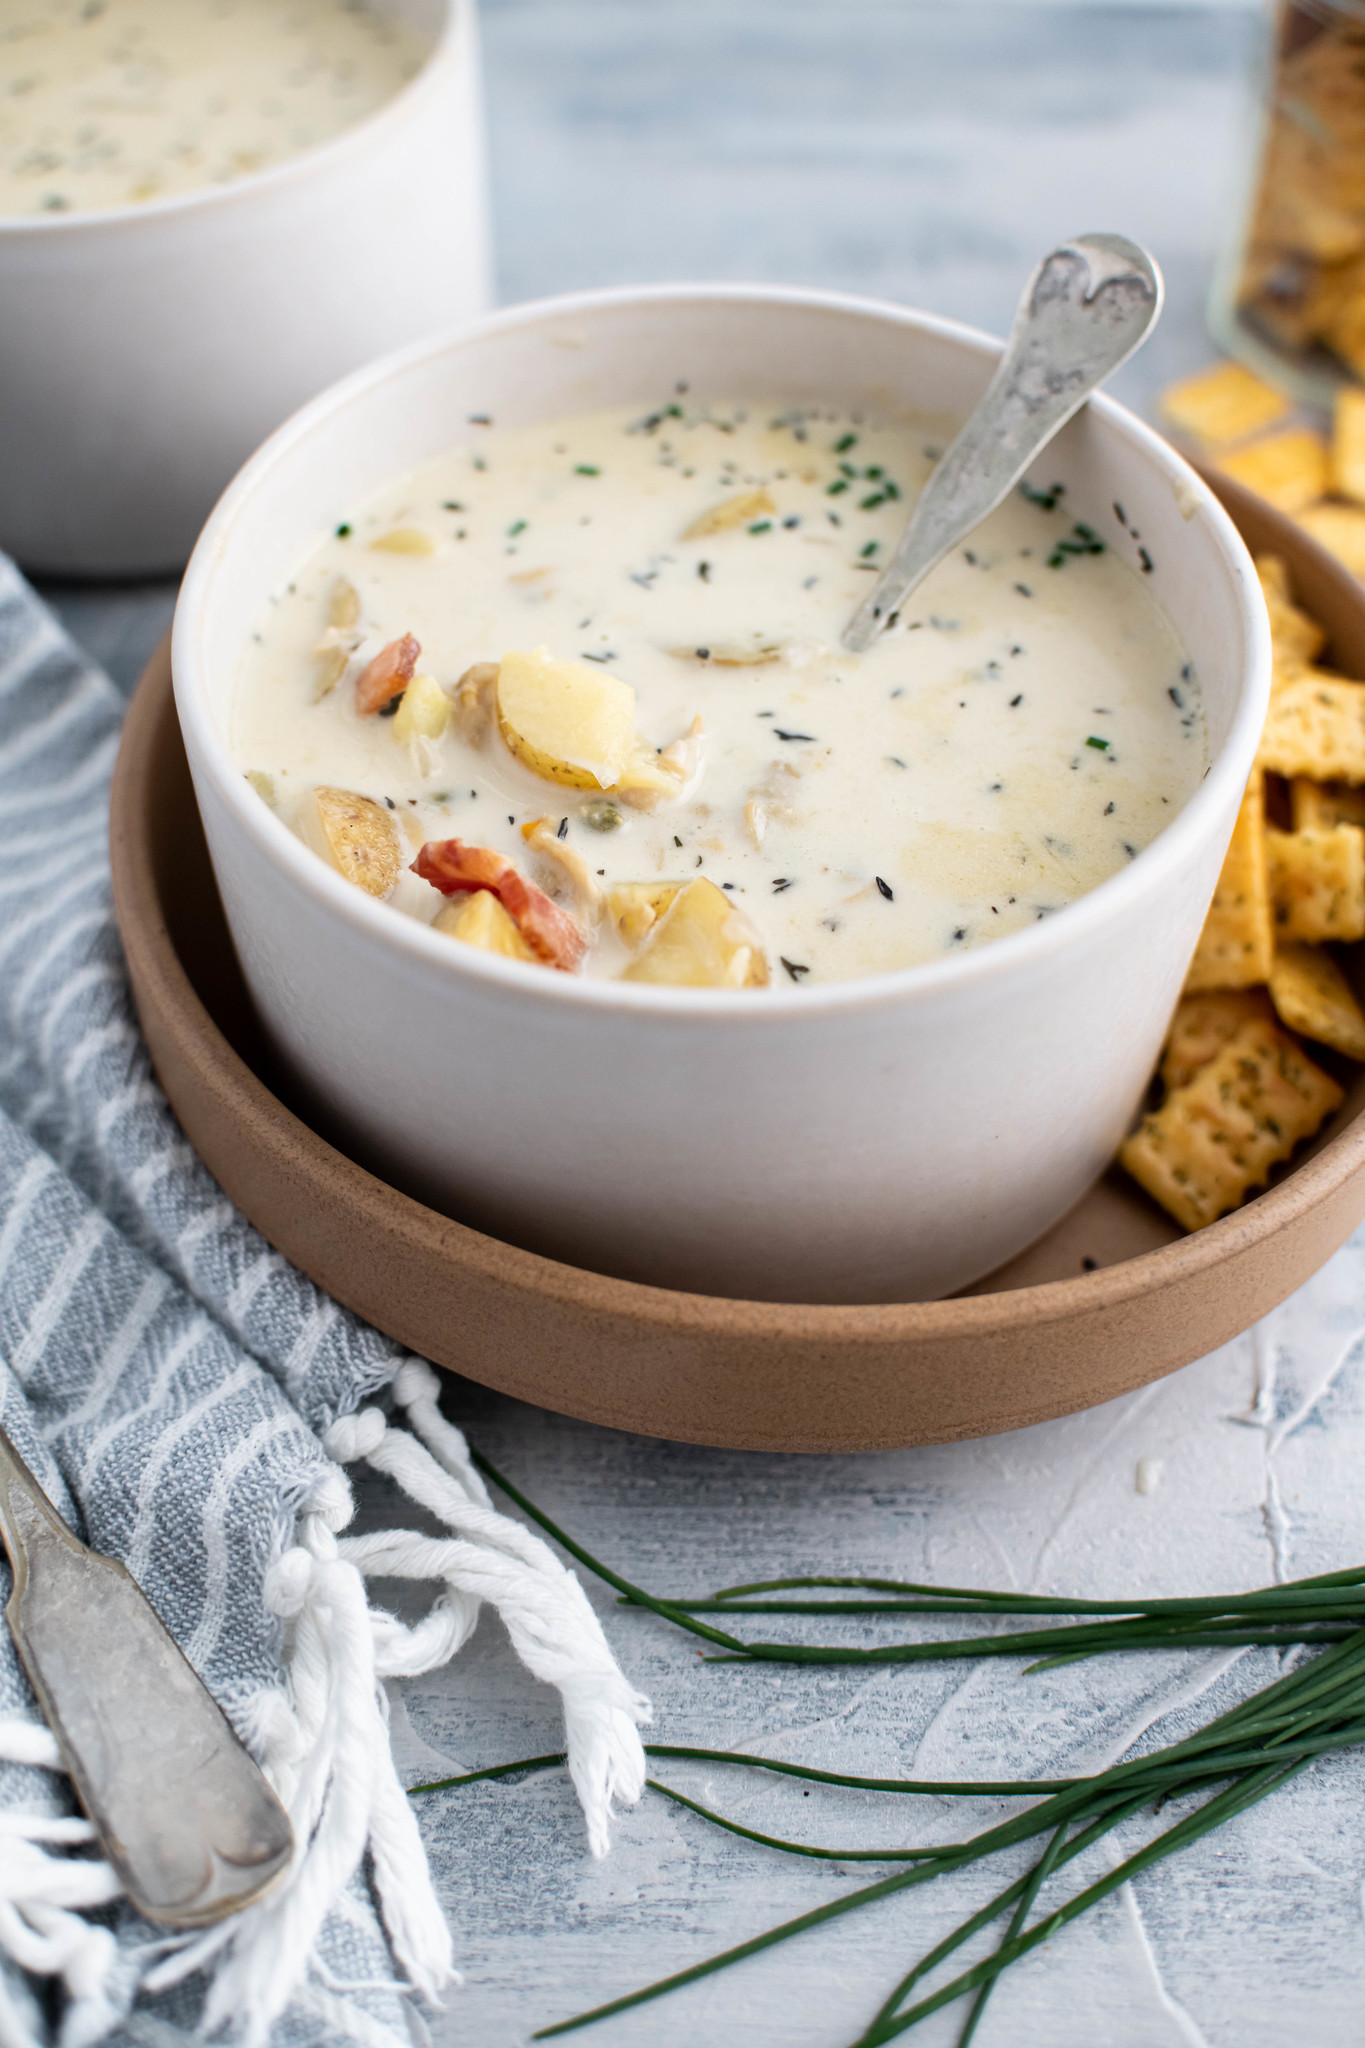 Large white bowl filled with instant pot clam chowder and set on a larger clay colored plate with crackers on the side.